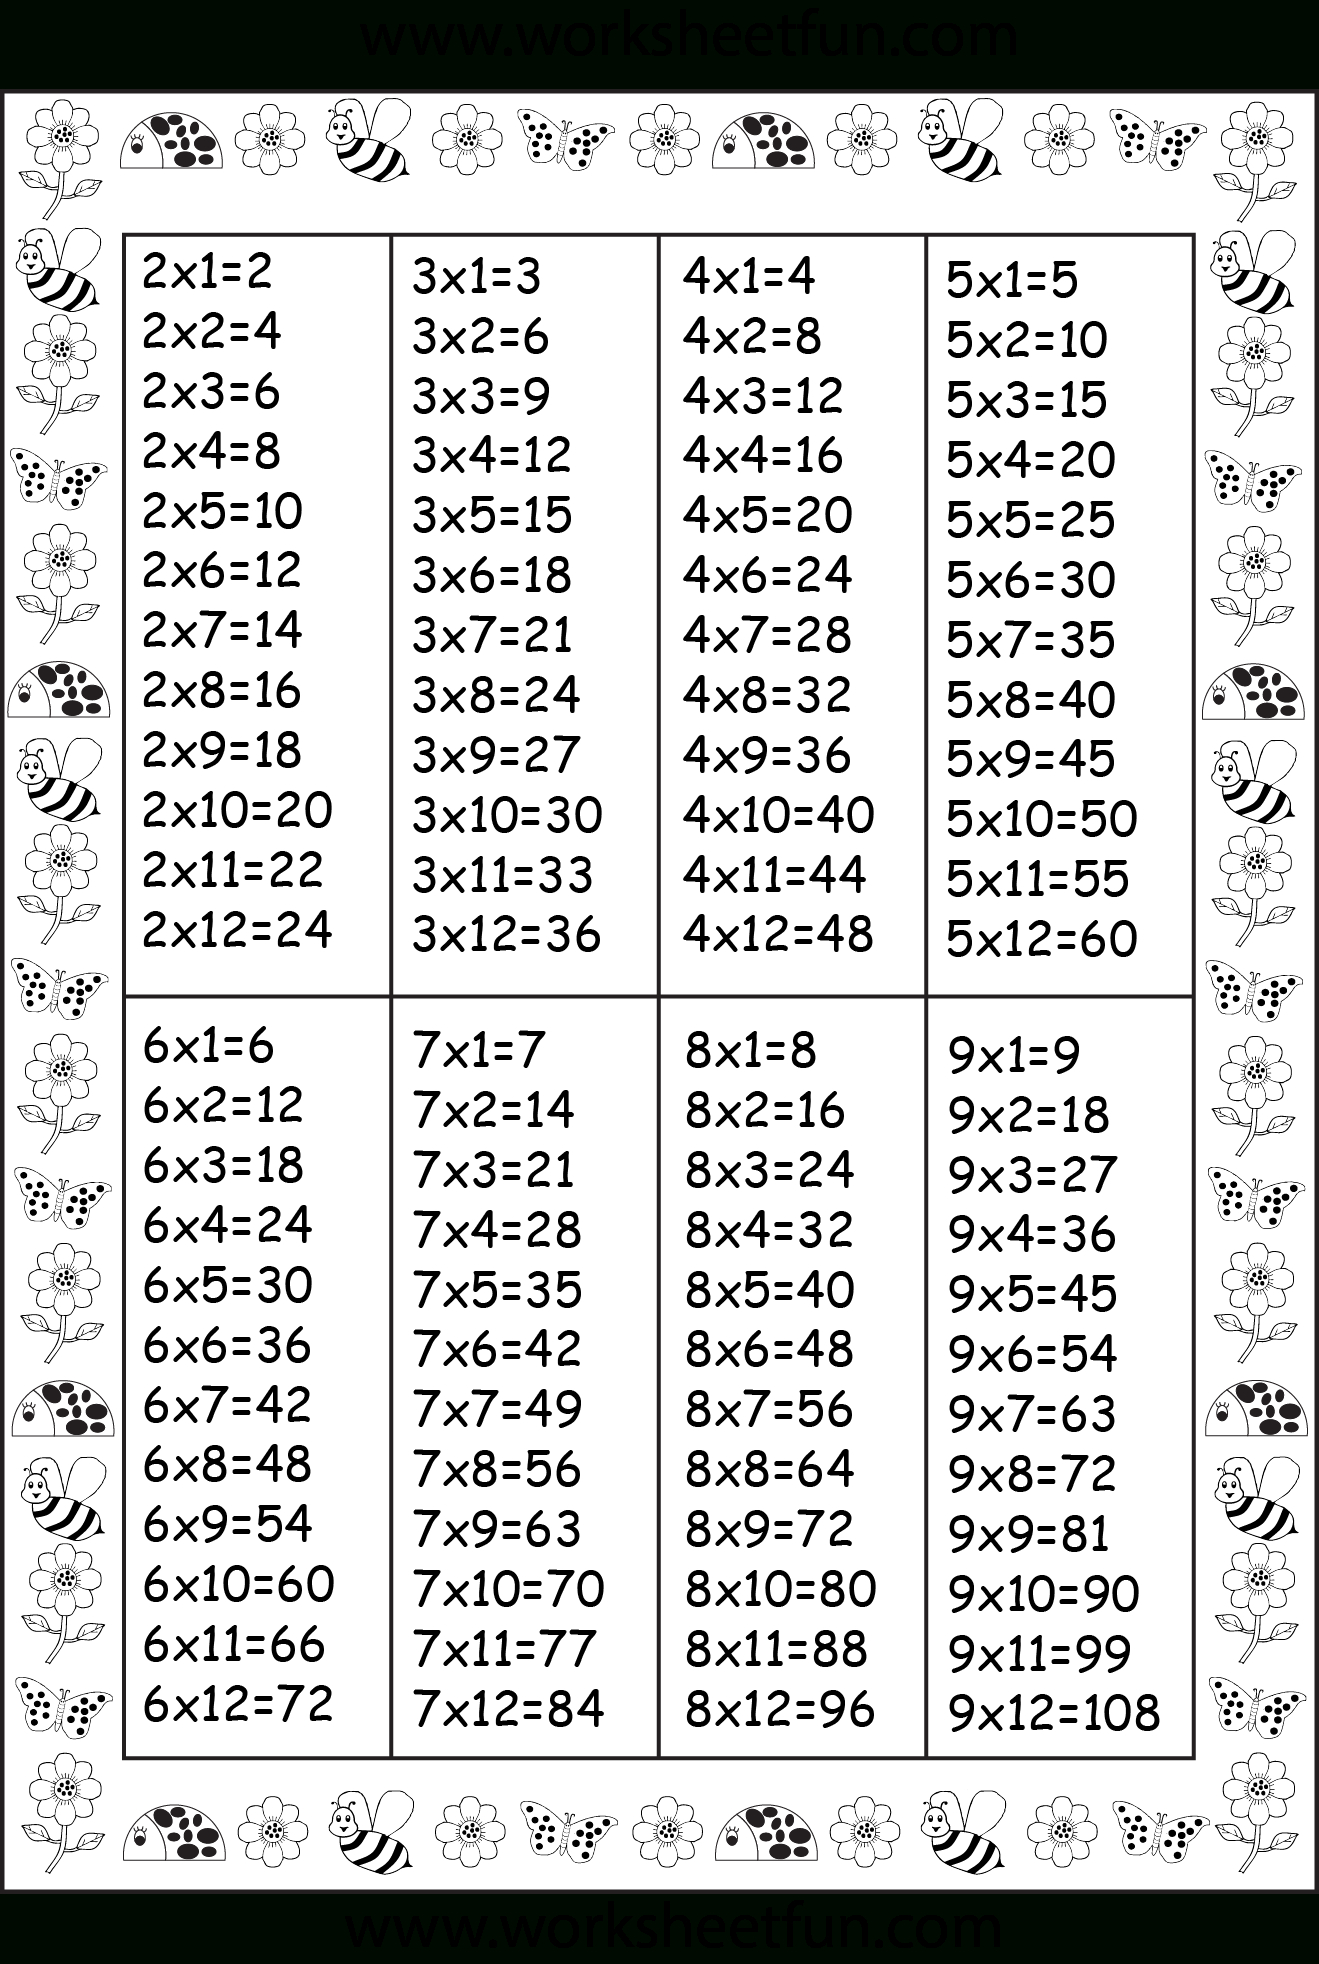 Times Table Chart | Times Table Chart, Multiplication Chart pertaining to Printable Math Multiplication Table